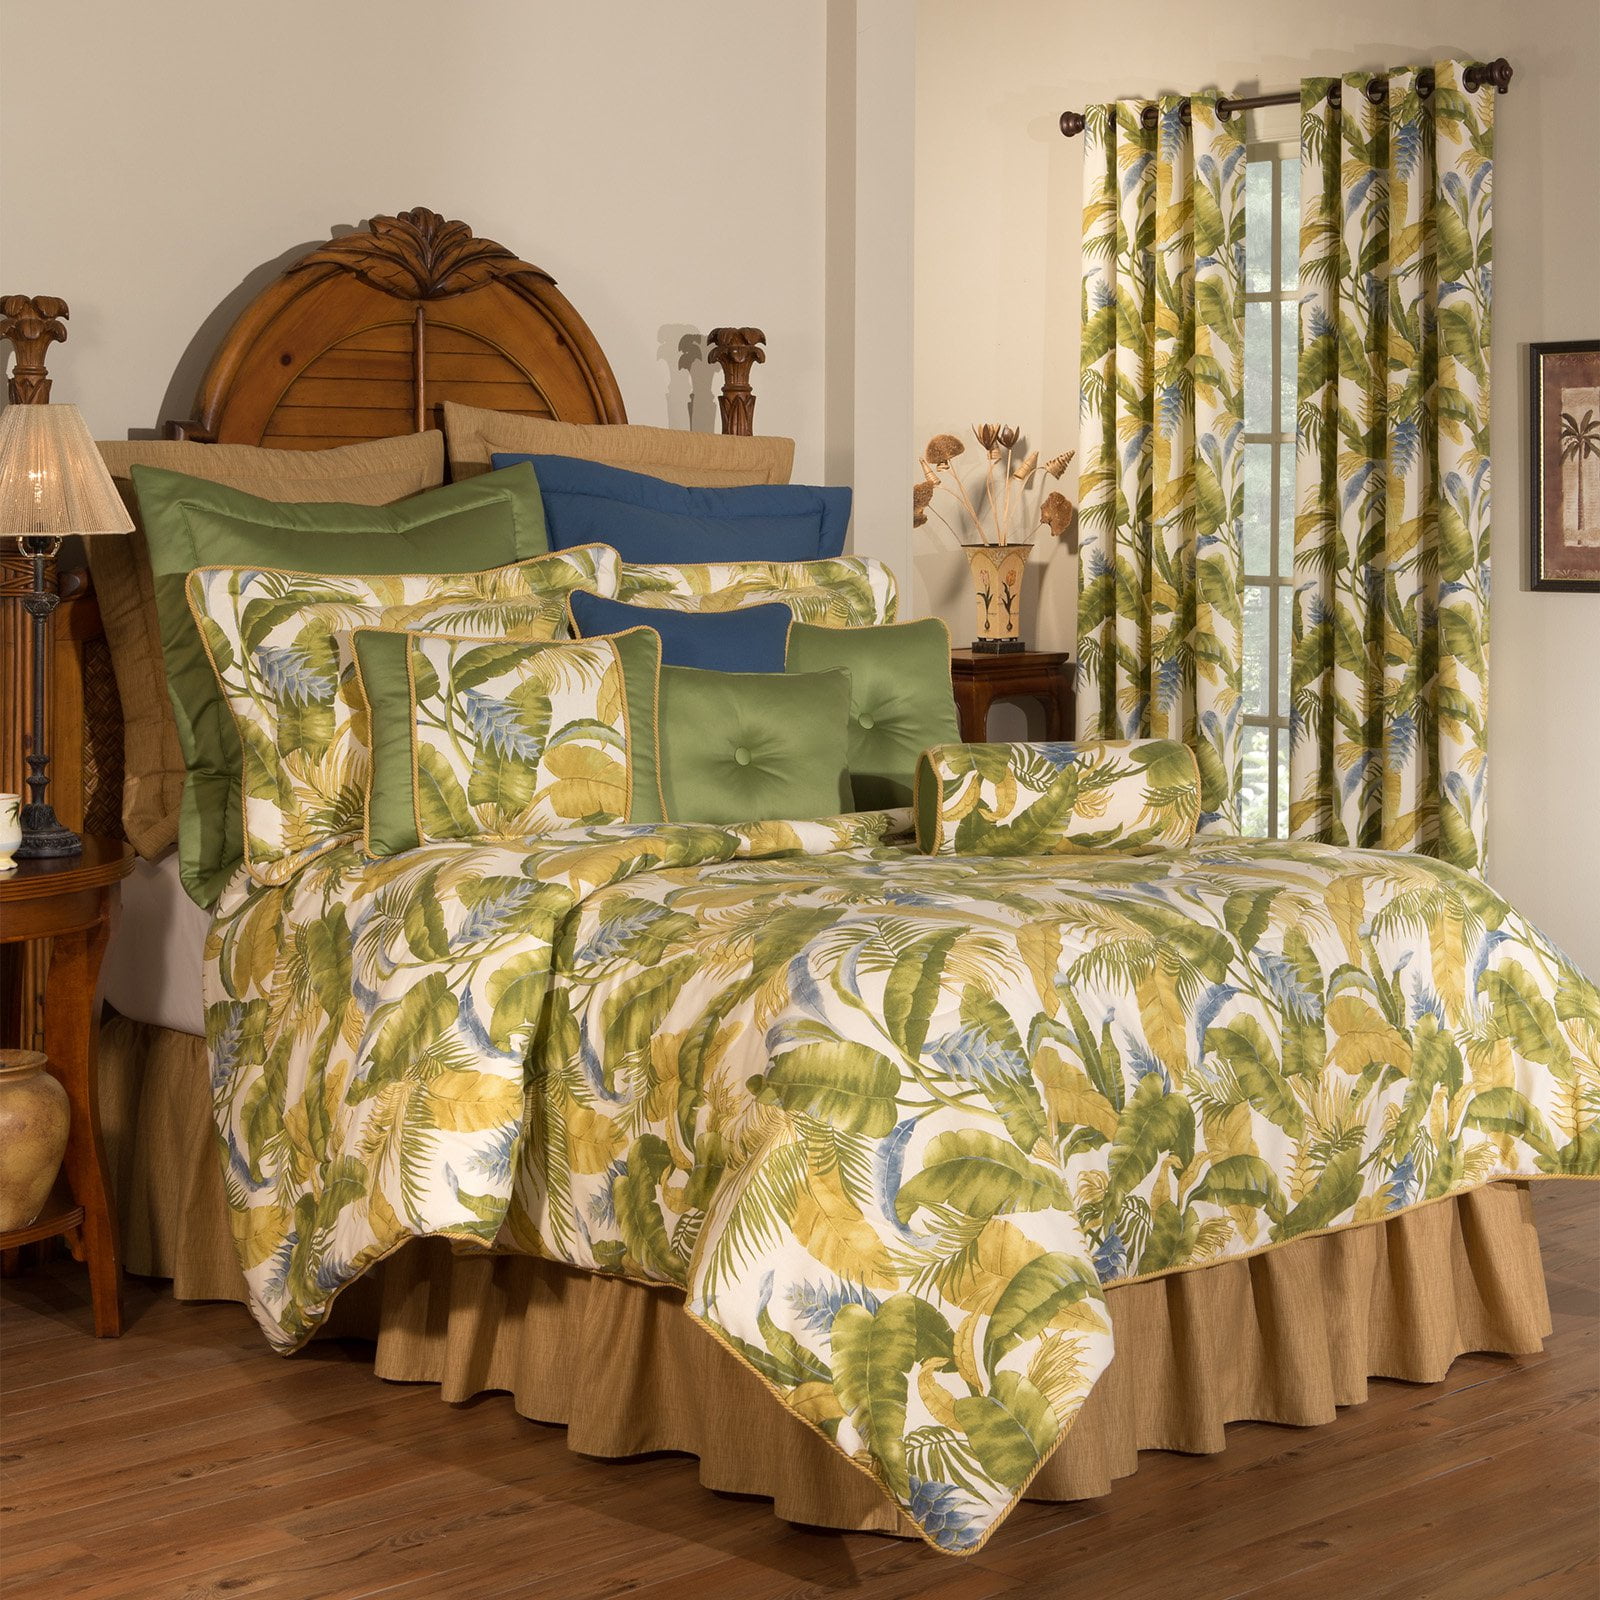 Cayman Comforter By Thomasville At Home, Thomasville Duvet Covers